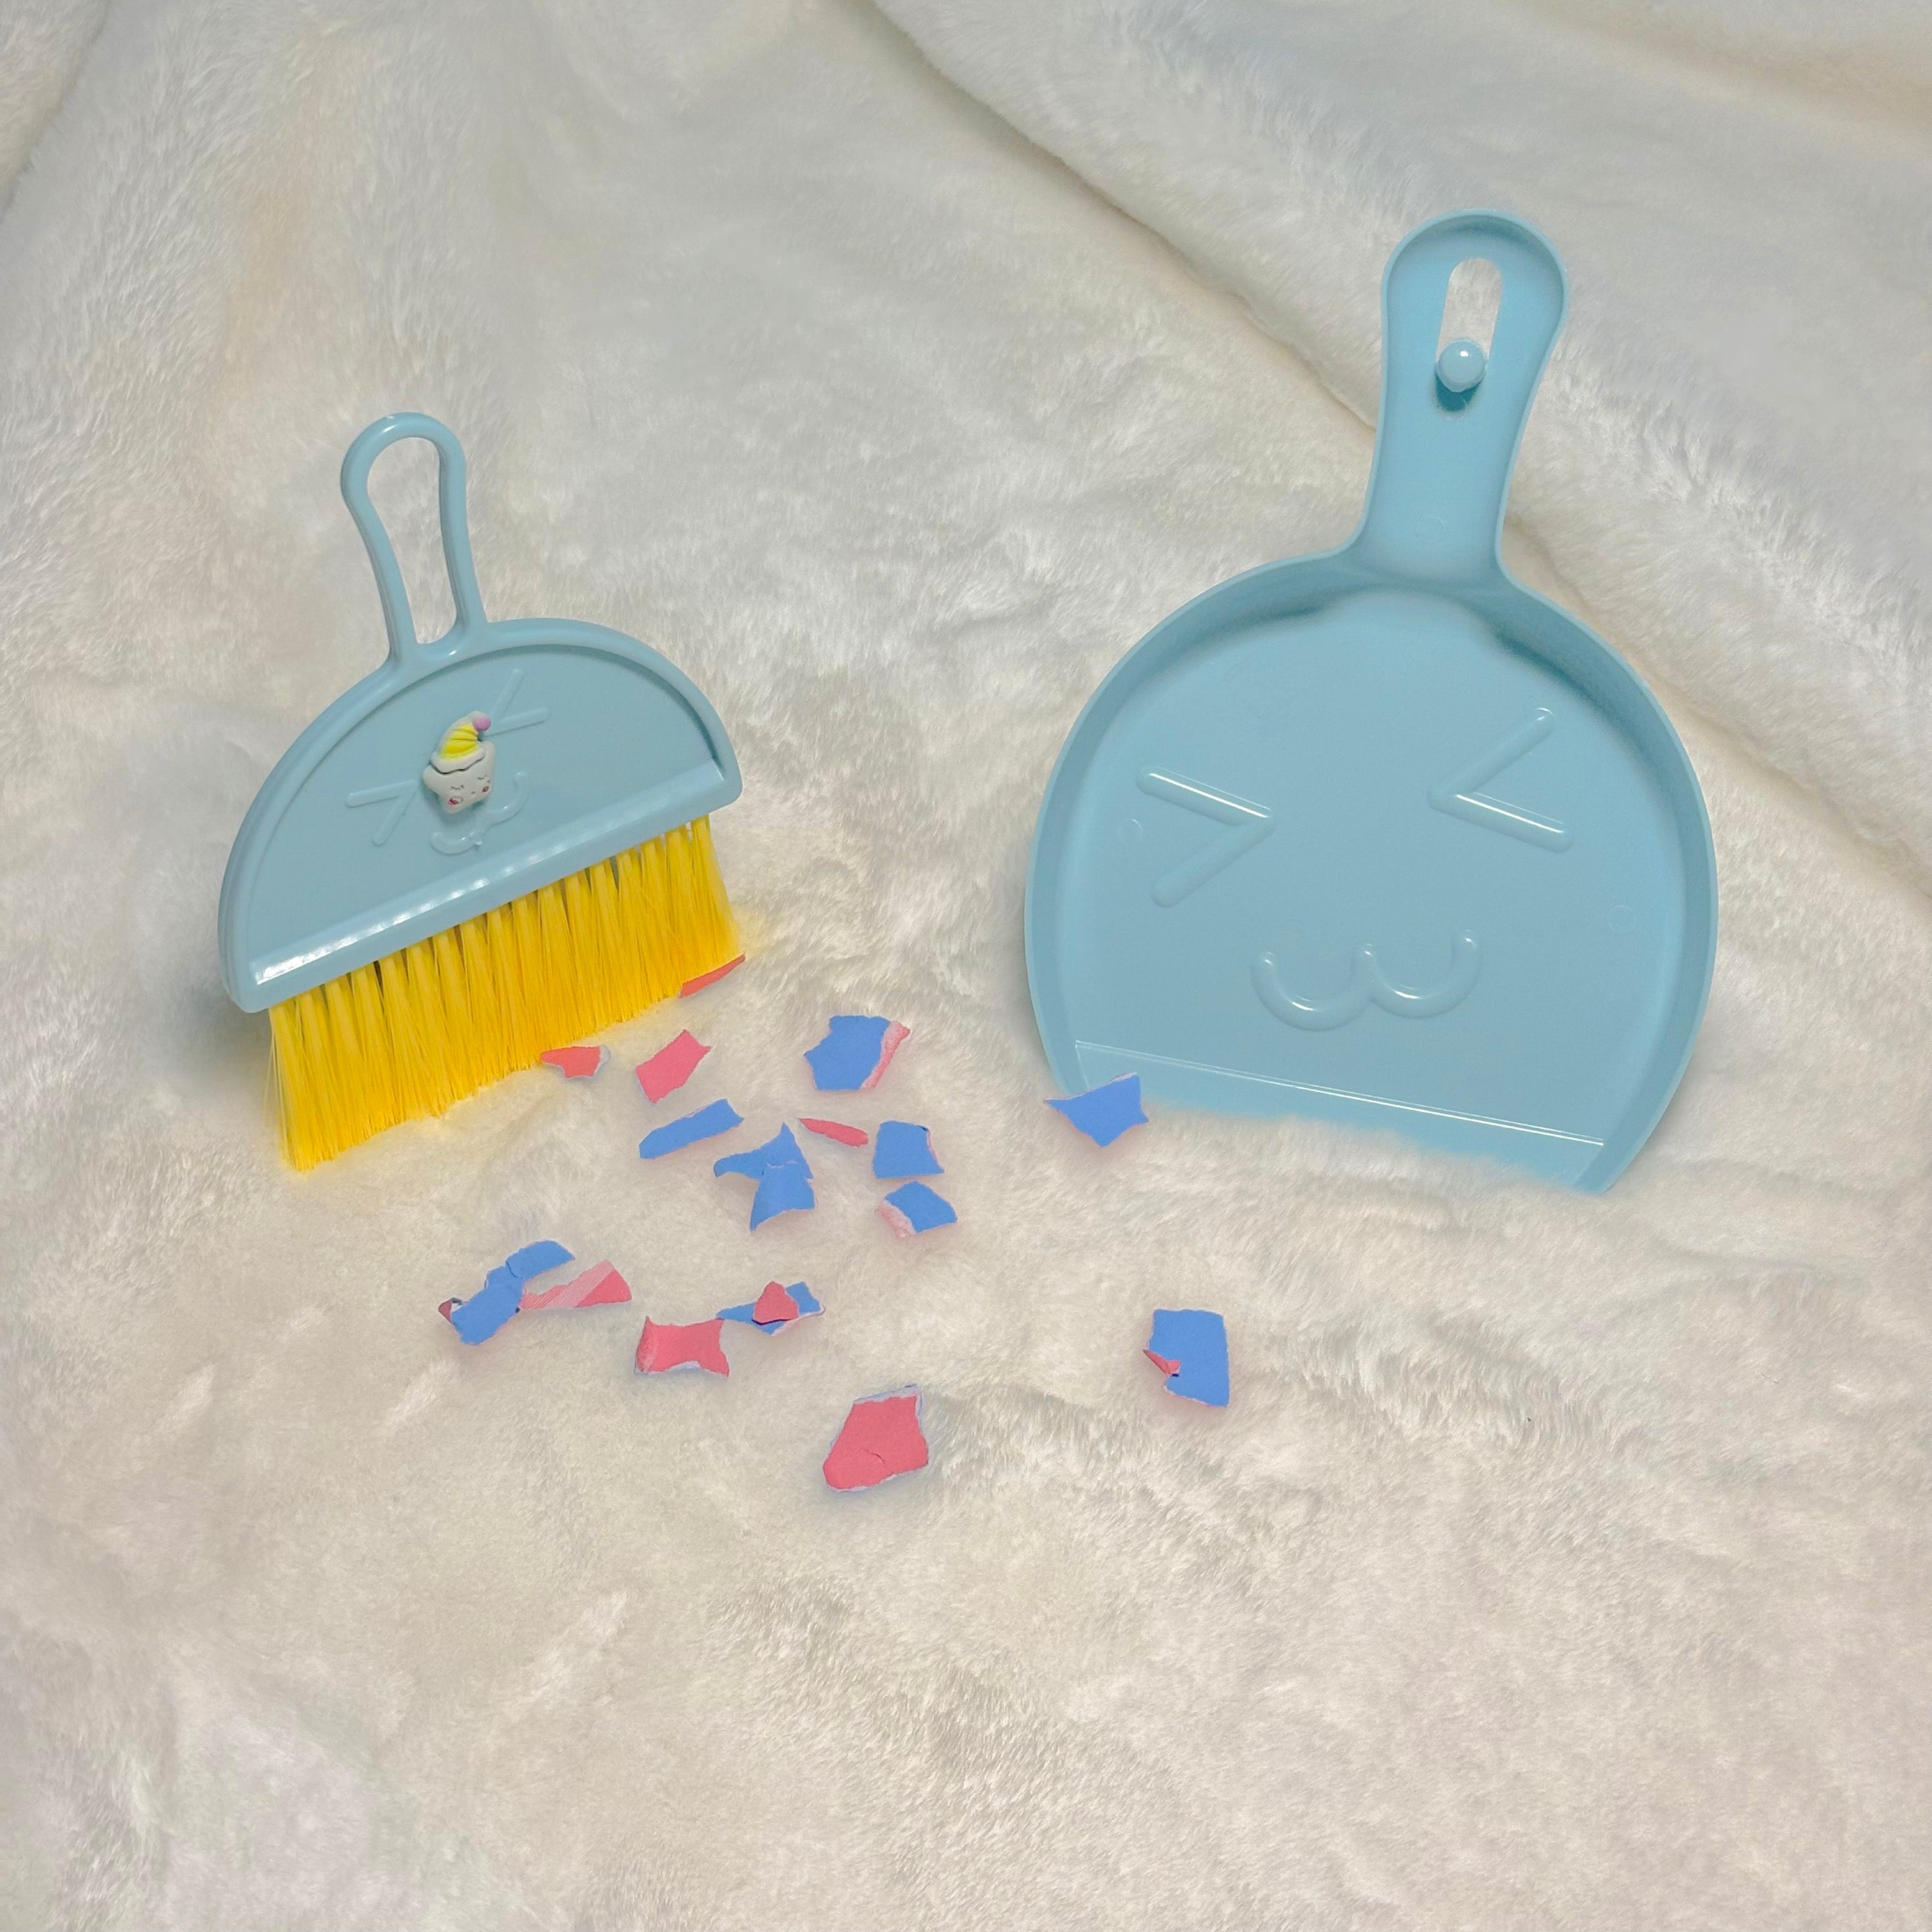 Cleaning sets for babies - B4brain